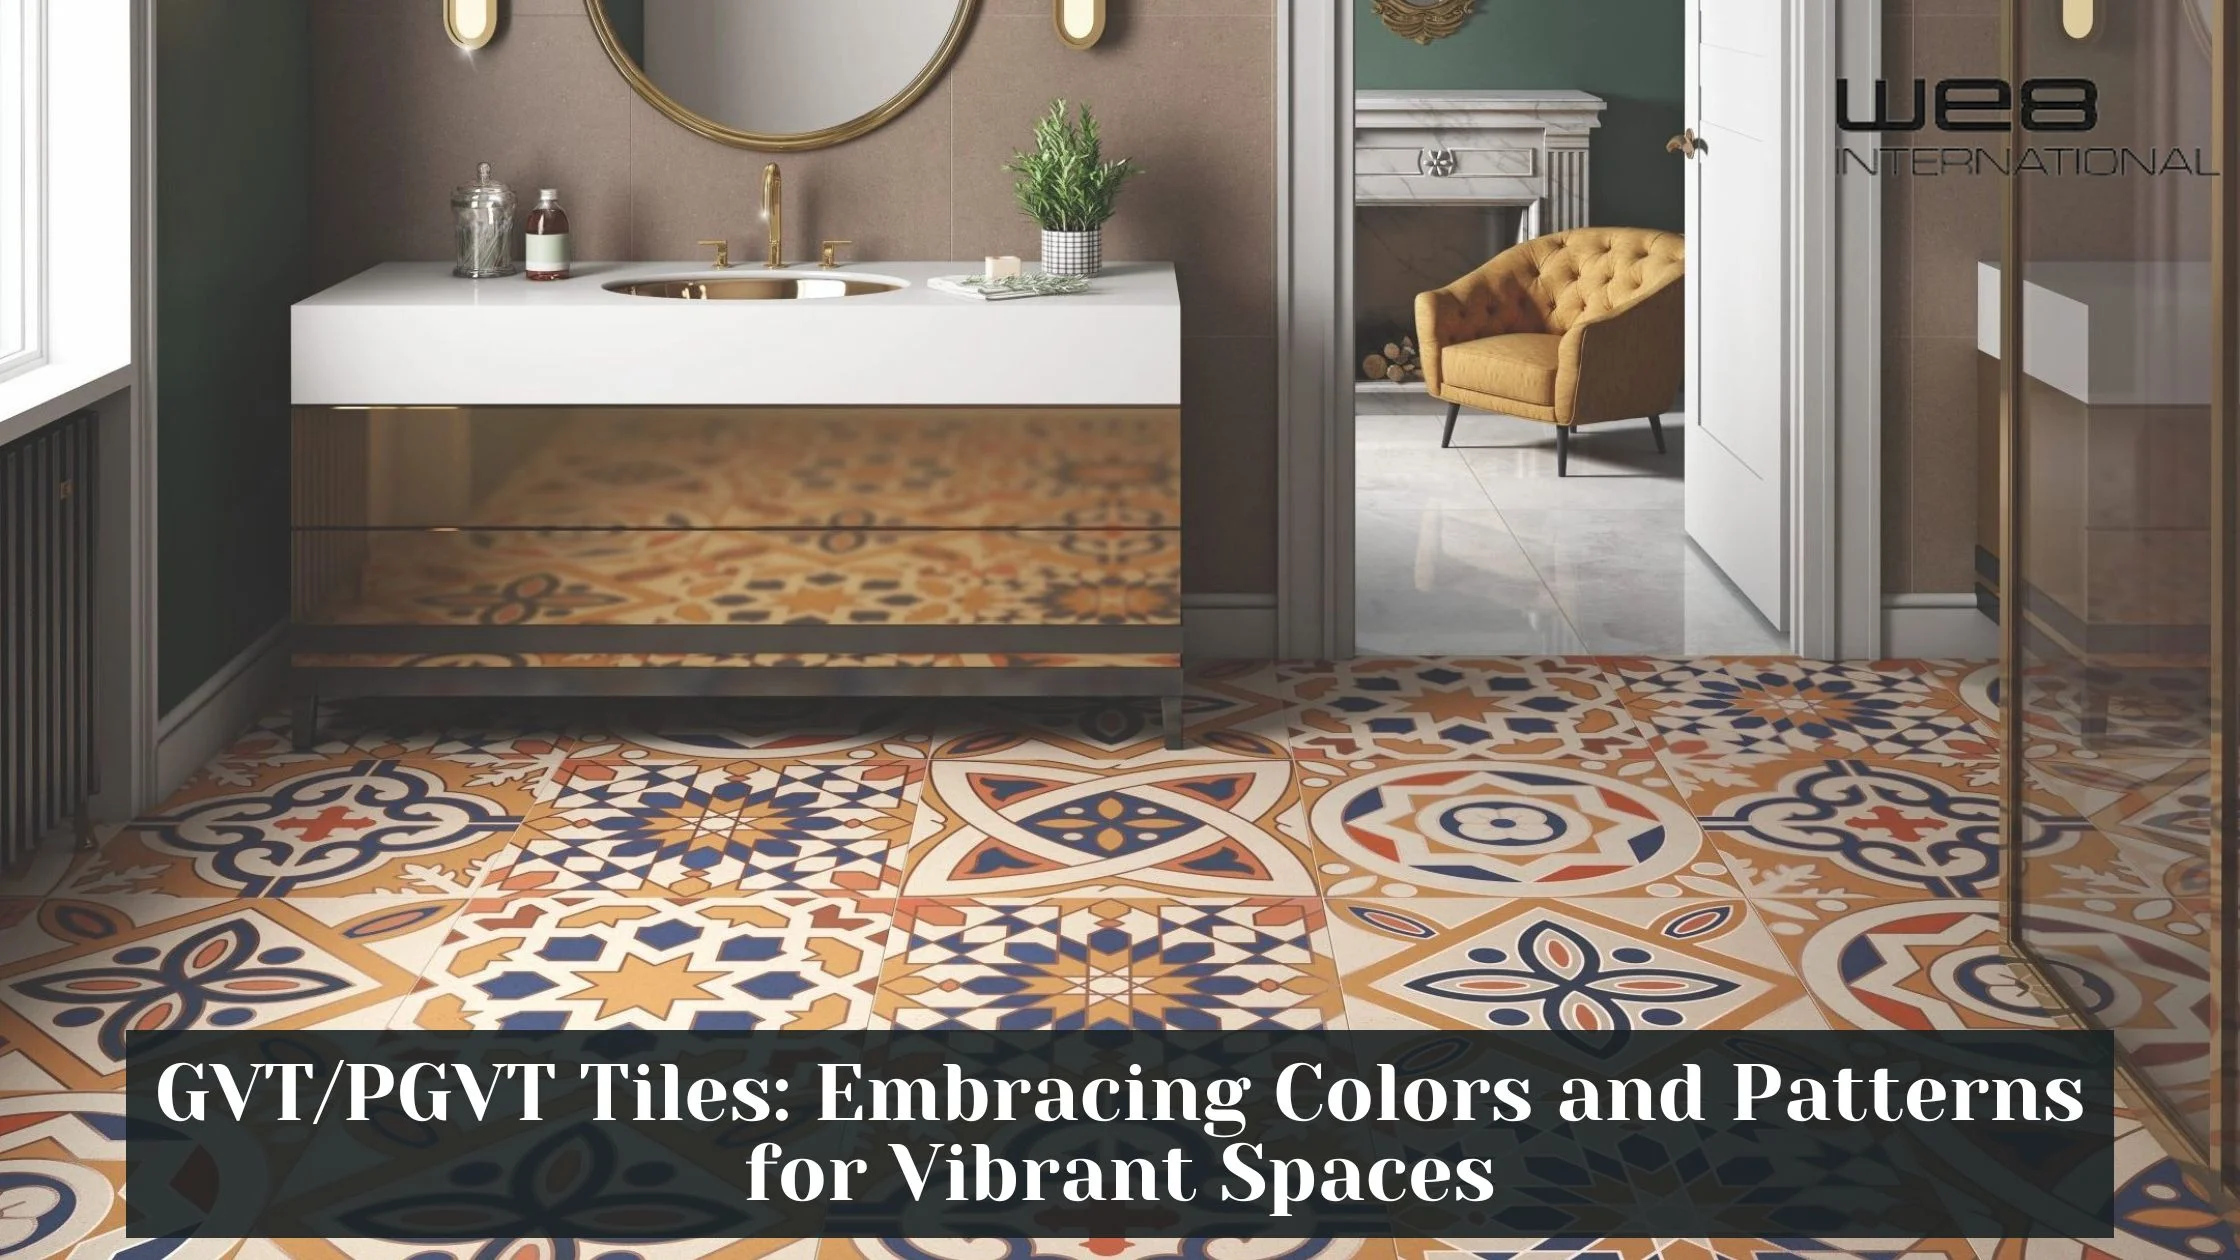 GVT/PGVT Tiles: Embracing Colors and Patterns for Vibrant Spaces